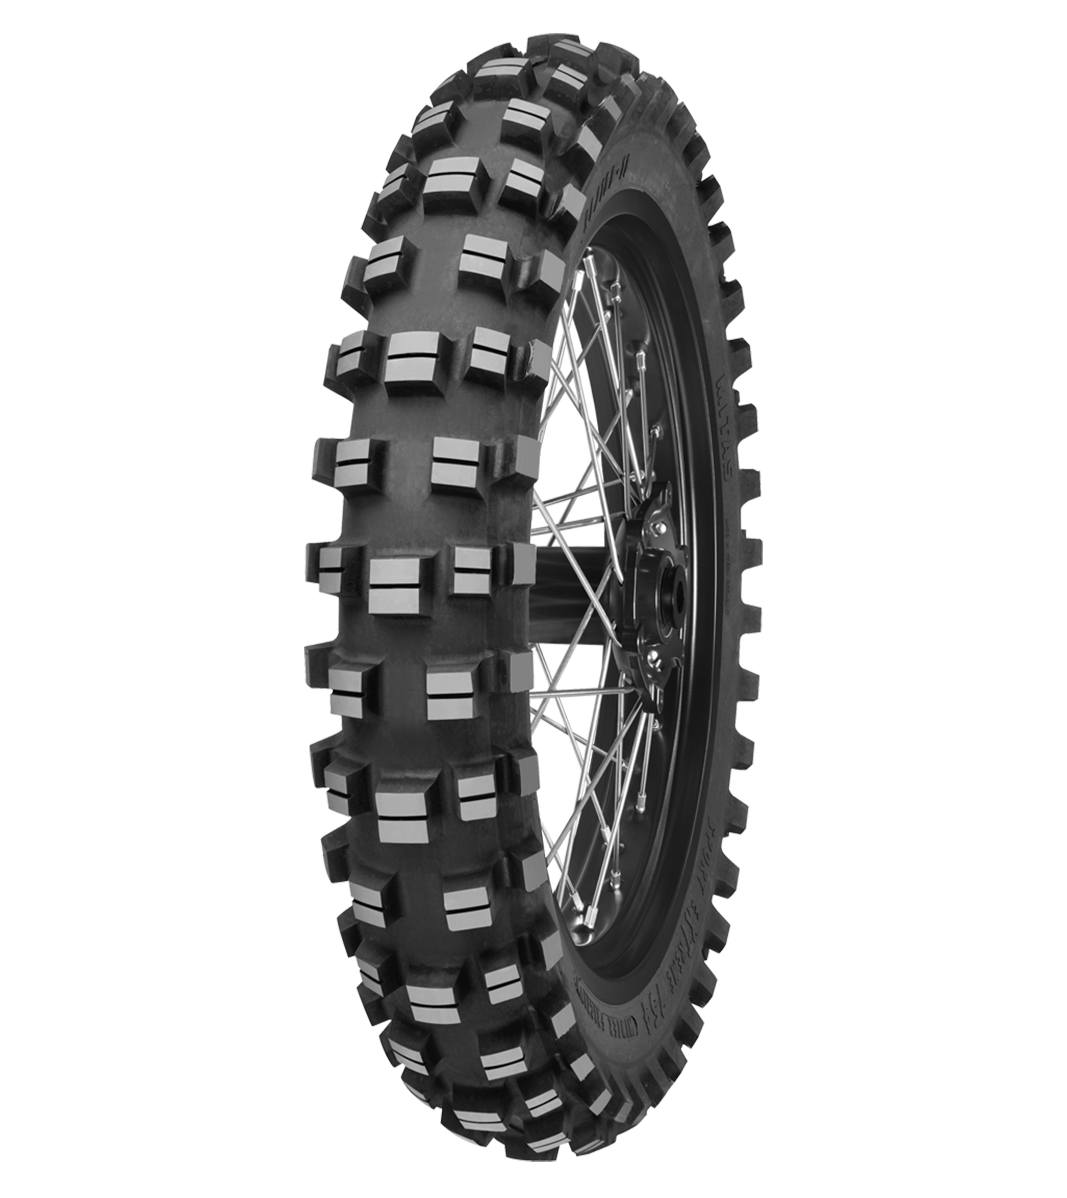 Mitas XT-754 120/90-18 All-Terrain Off-Road 65P No Stripe Tube Rear Tire, 228023, 120/90-18, All-Terrain, Off-Road, Rear, XT-754, Tires - Imported and distributed in North &amp; South America by Lindeco Genuine Powersports - Premier Powersports Equipment and Accessories for Motorcycle Enthusiasts, Professional Riders and Dealers.